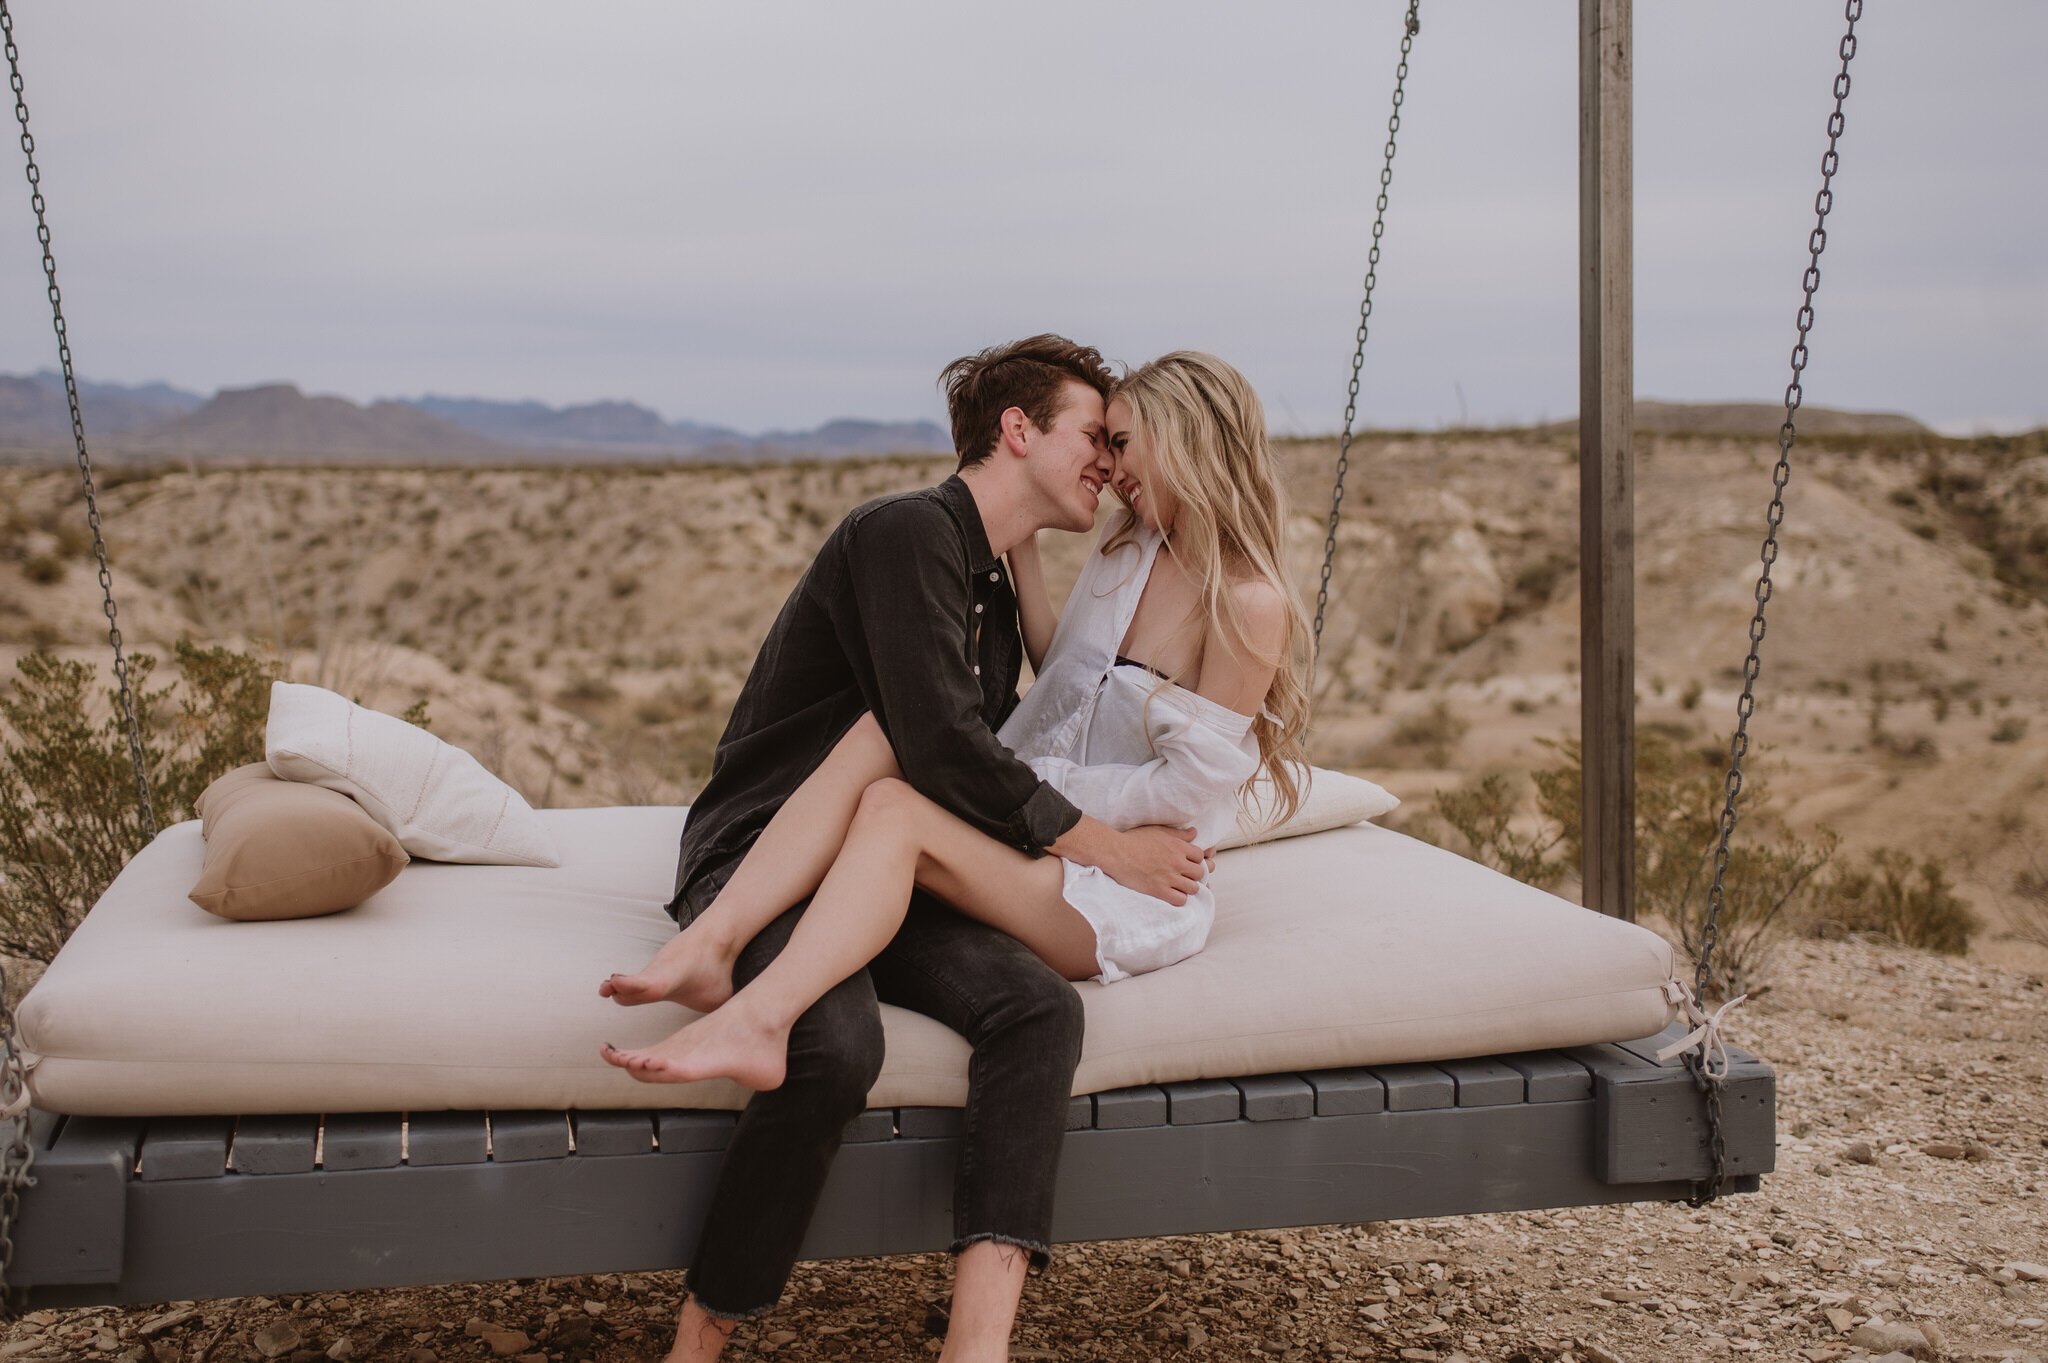 Kaylie-Sirek-Photography-Big-Bend-National-Park-Texas-Engagement-Session-Styled-You-009.jpg